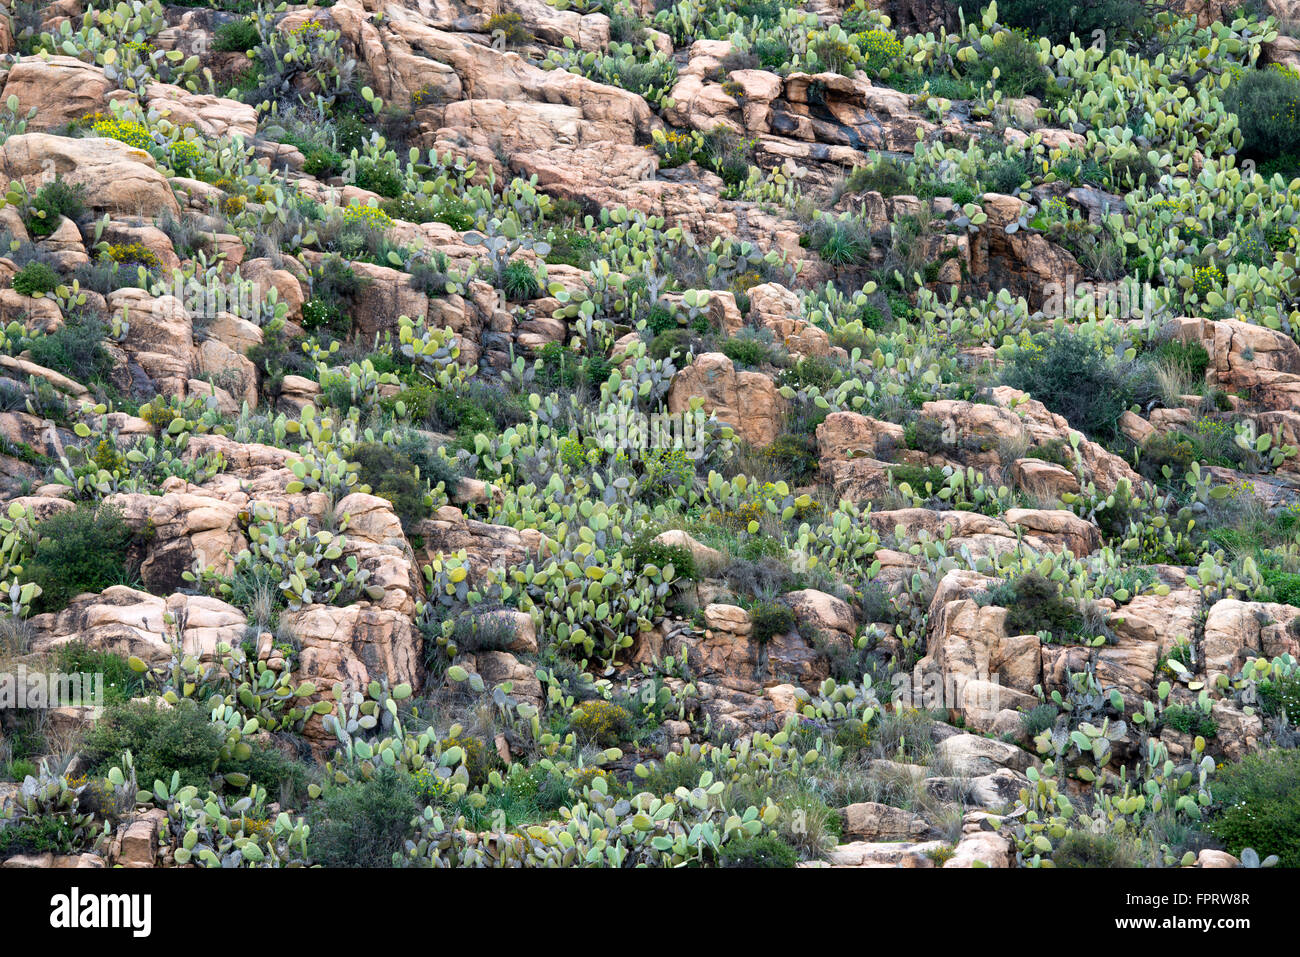 Rocky landscape with prickly pear cactus (Opuntia ficus-indica) and spurges (Euphorbia), Sardinia, Italy Stock Photo